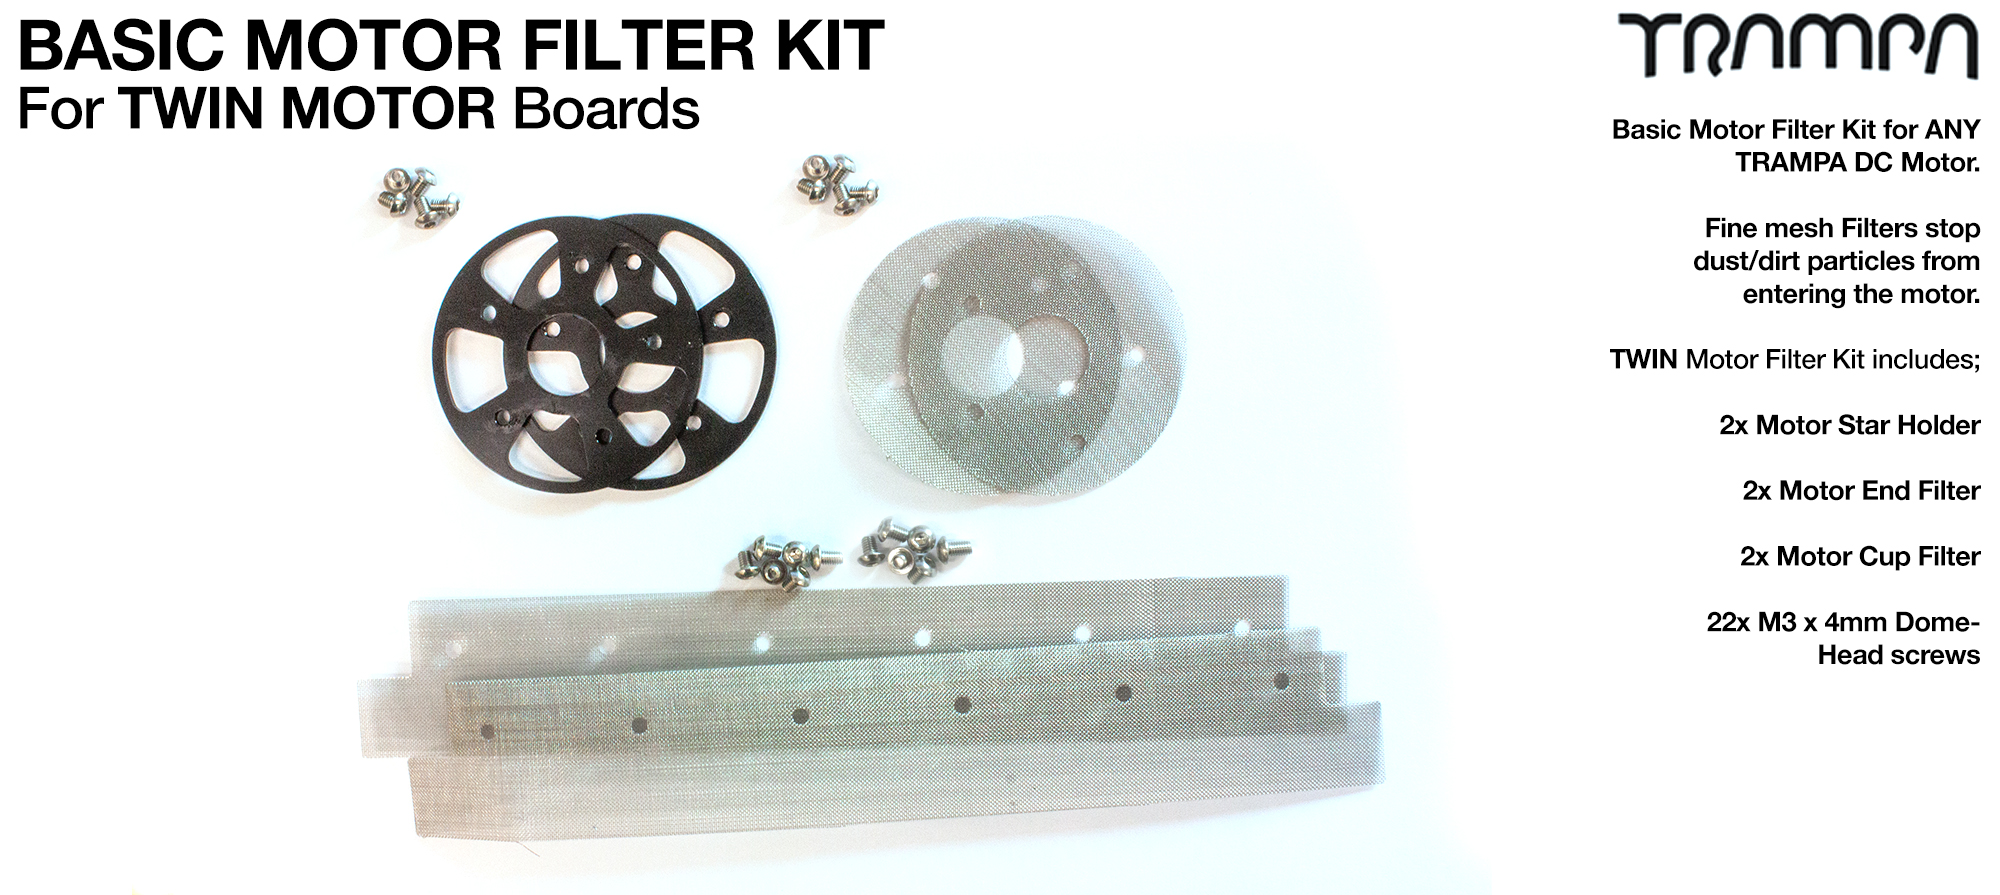 2x Stainless Steel Mesh Filter Kit with Bolts for TRAMPA Motors